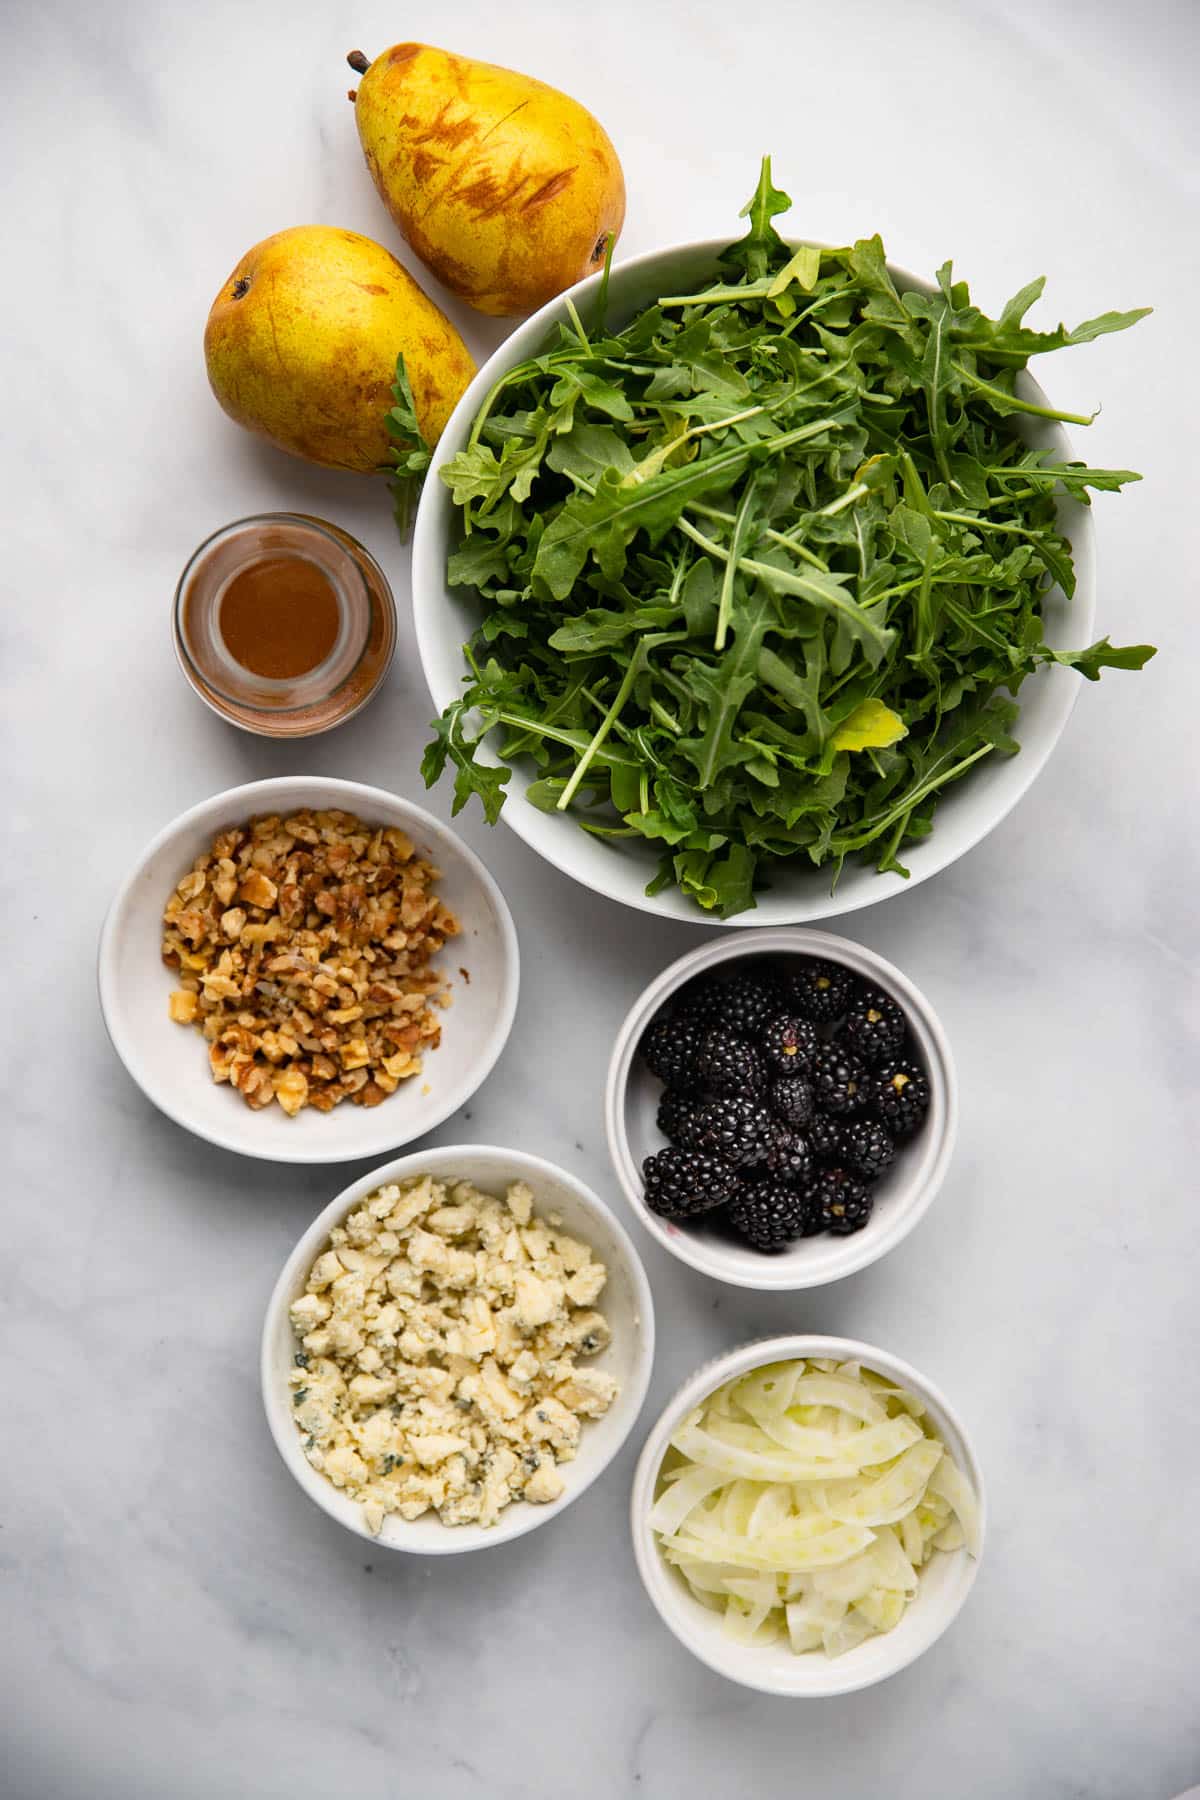 pear salad ingredients in small bowls on a white background.